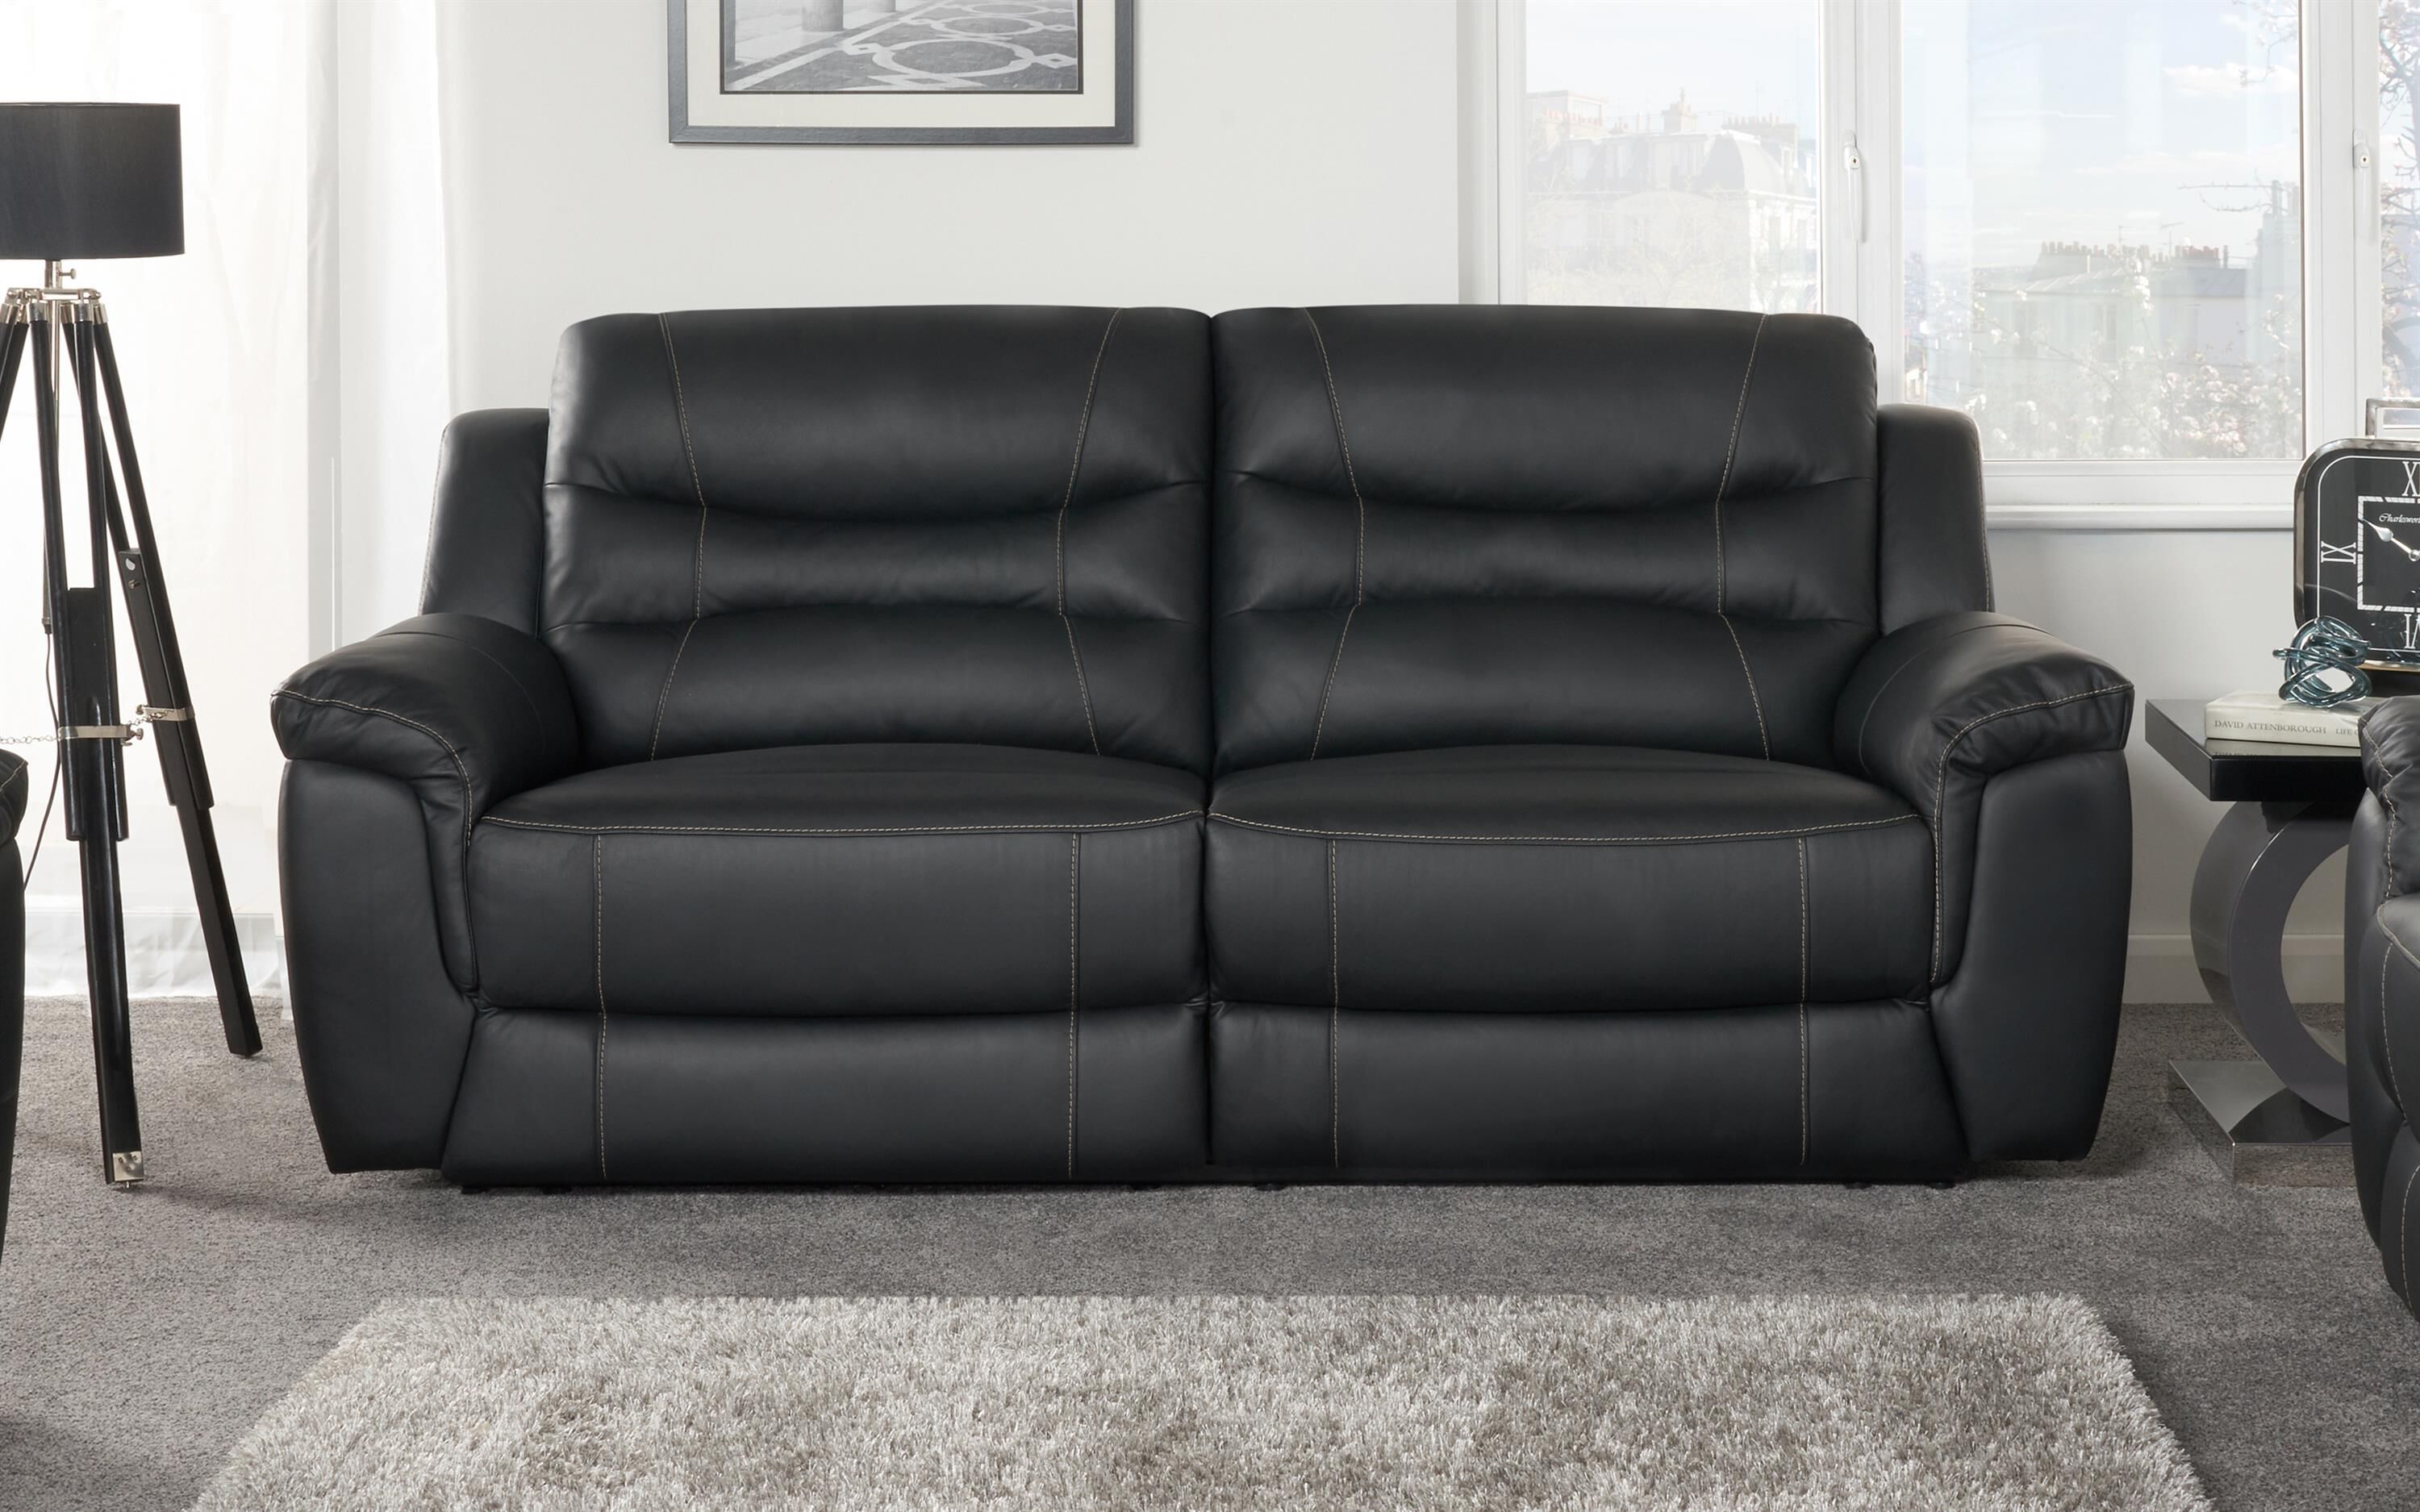 Black And Grey Leather Sofa Flash S, Grey Leather Sofa And 2 Chairs